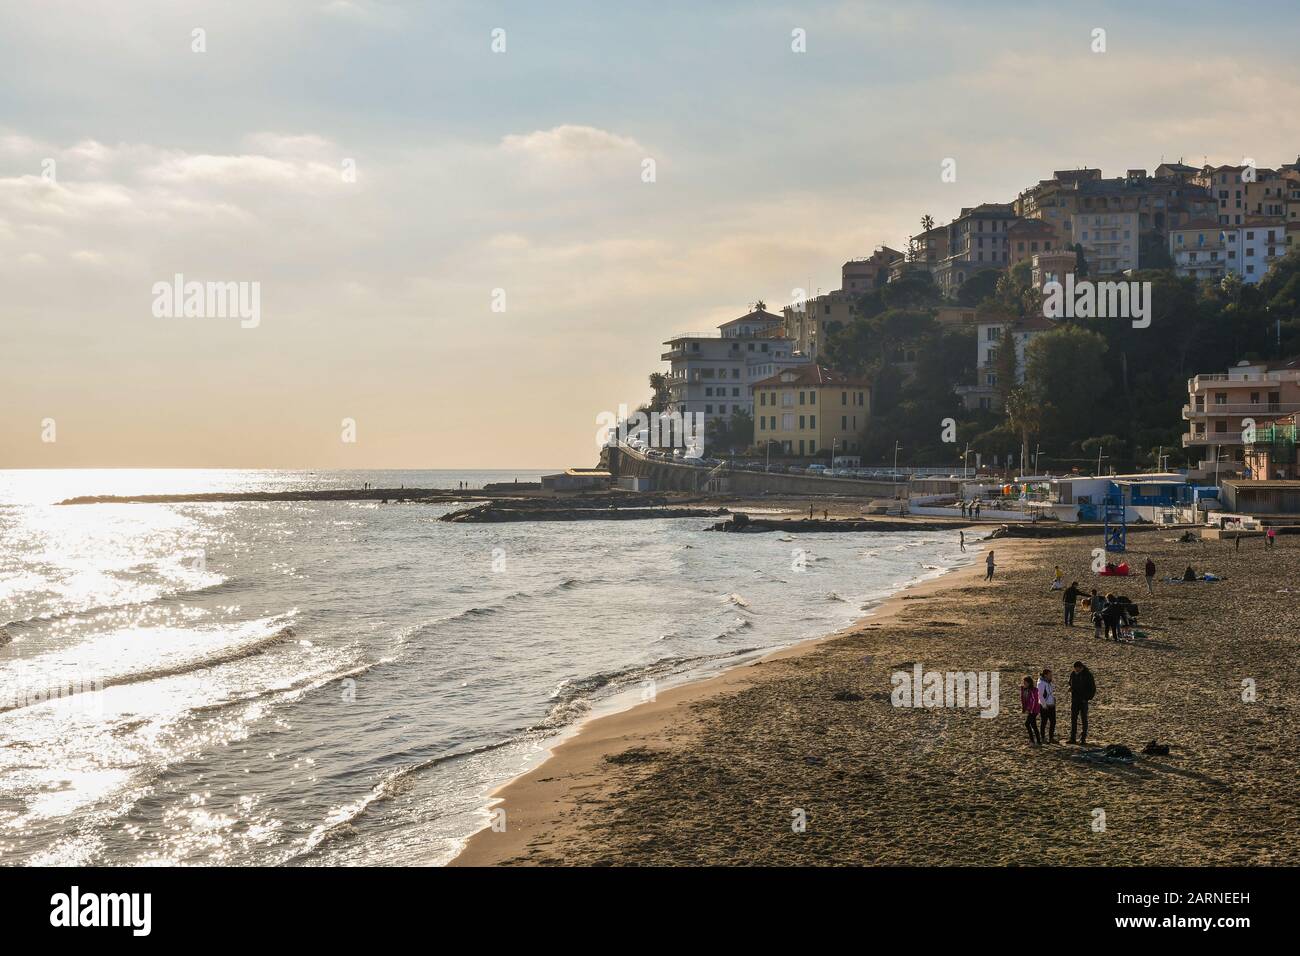 Sandy beach of Porto Maurizio with people enjoying the sun in a warm winter day and the Parasio old borough on the cape, Imperia, Liguria, Italy Stock Photo